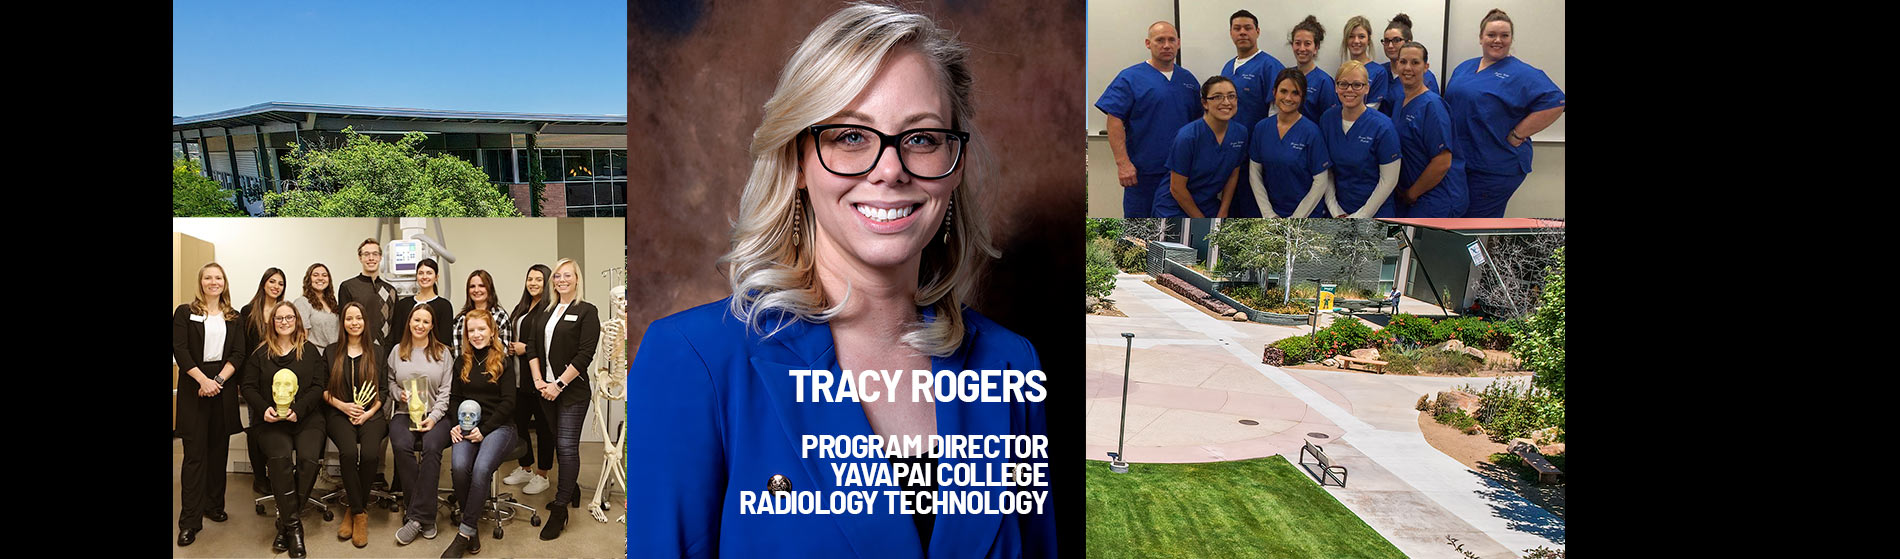 Tracy Rogers - Radiology Technology Program Director